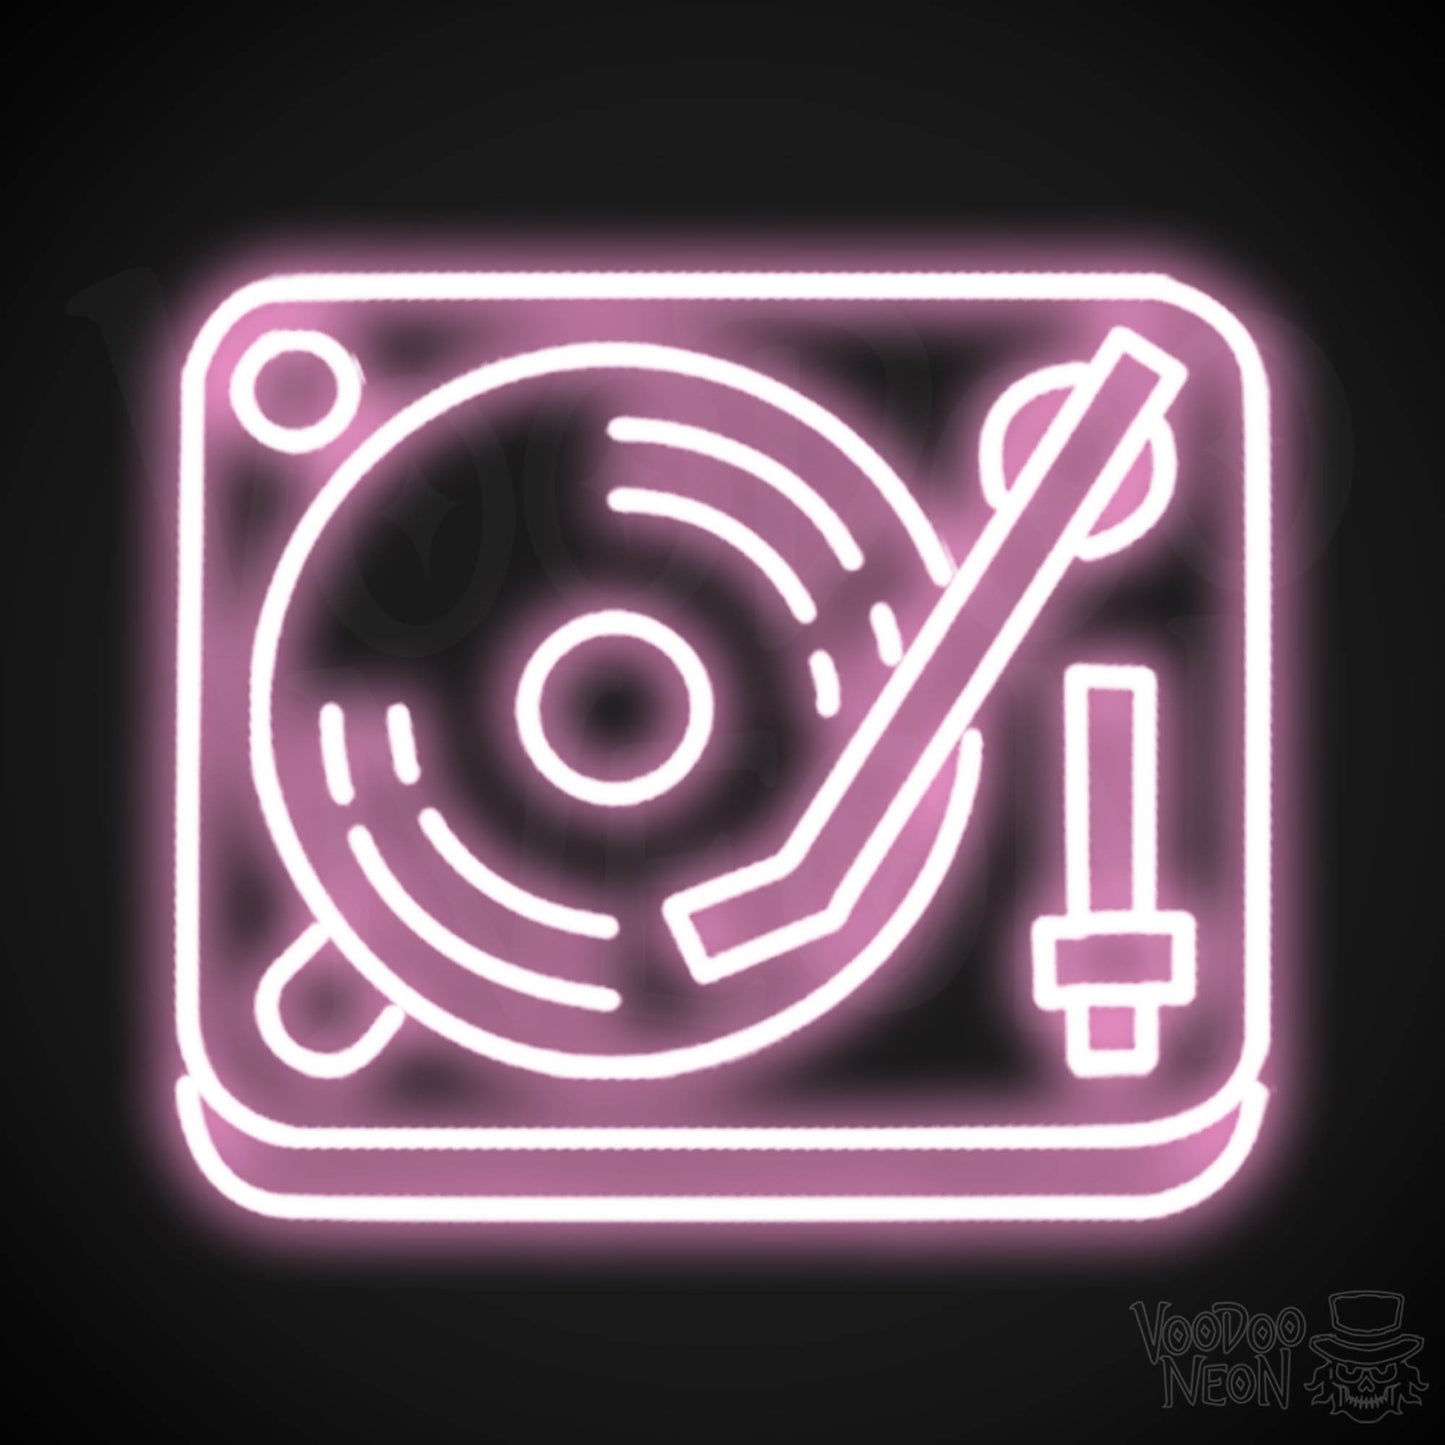 Retro Record Player Neon Sign - Record Player Neon Wall Art - Color Light Pink